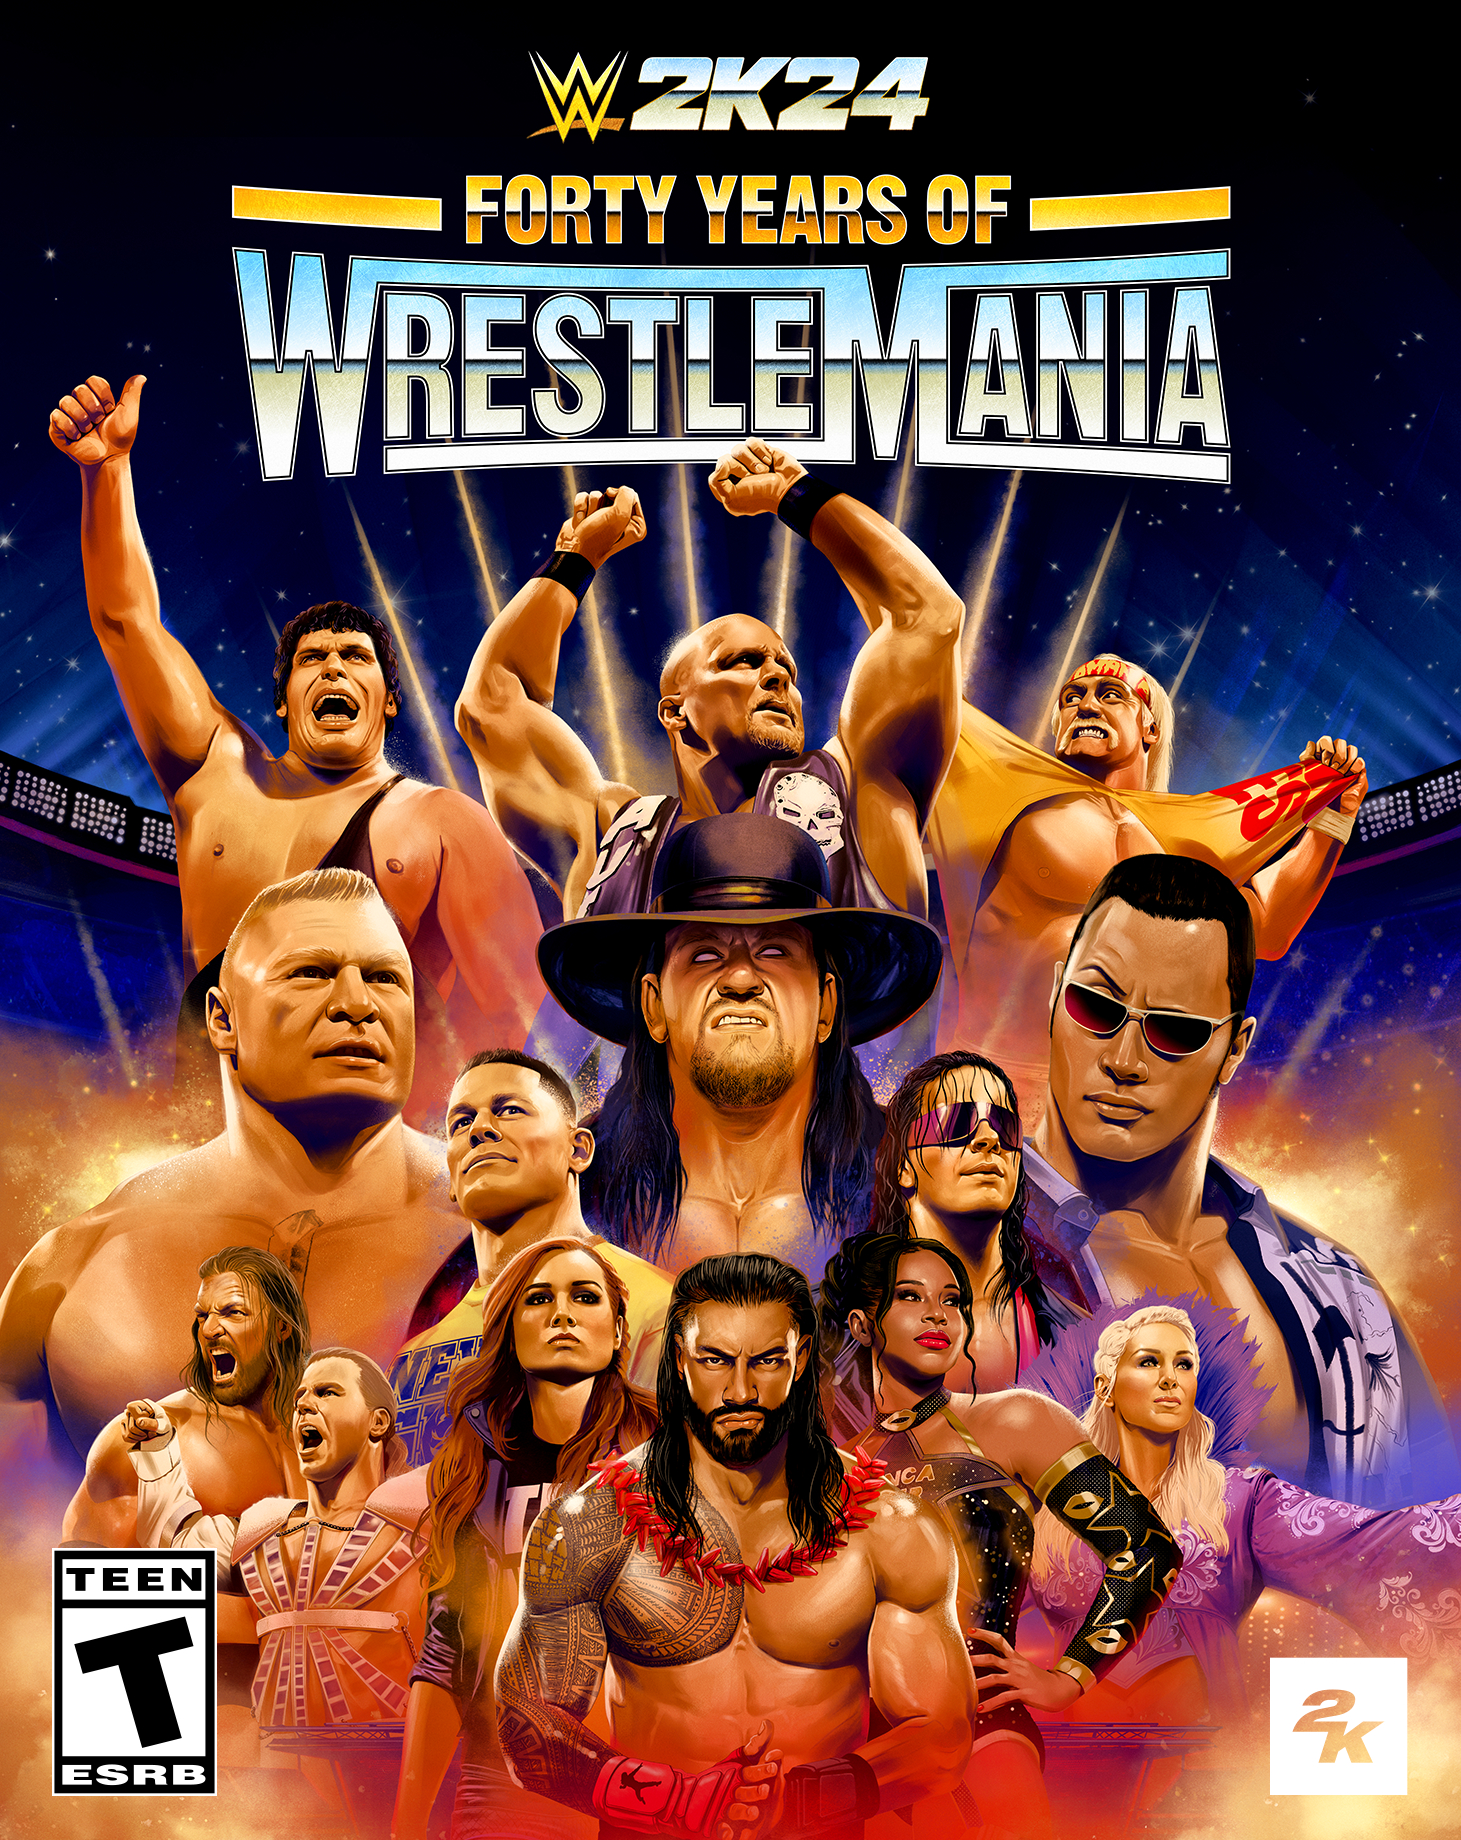 WWE 2K24 FORTY YEARS OF WRESTLEMANIA EDITION